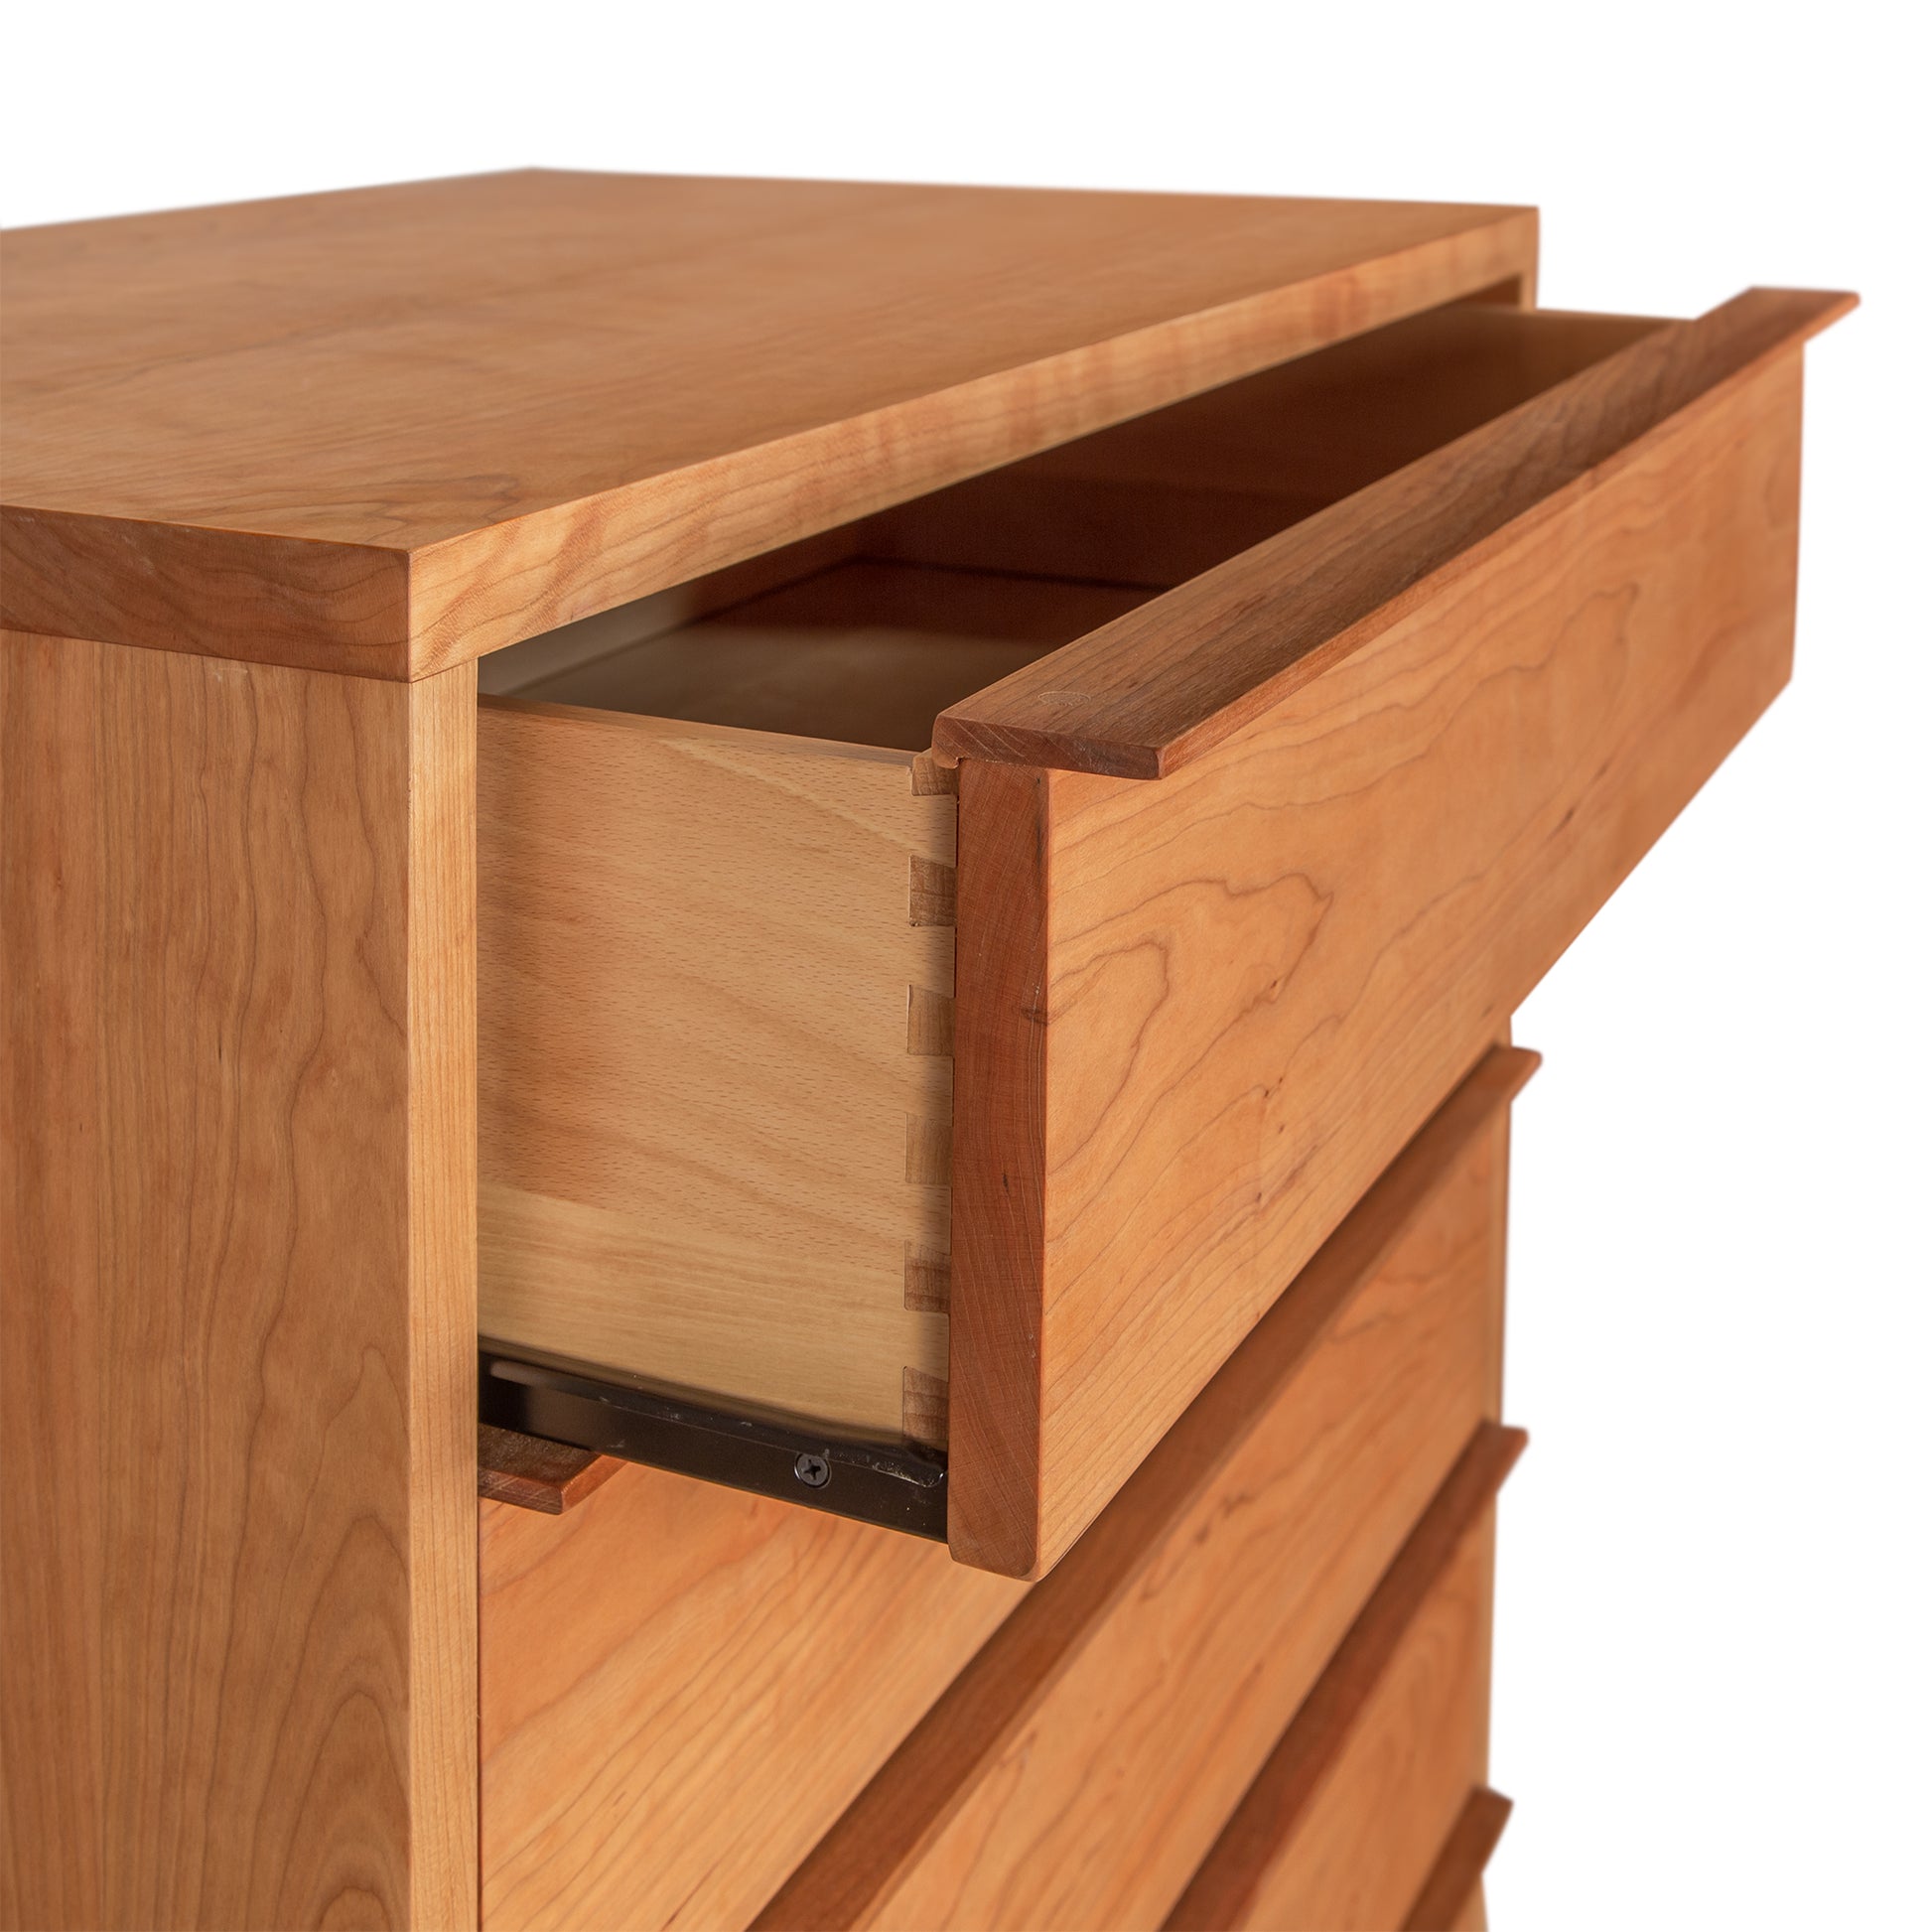 Vermont craftsmanship imbues the Vermont Furniture Designs Kipling 5-Drawer Wide Chest, a handcrafted furniture piece featuring a wooden dresser with an open drawer revealing its meticulous construction and metal slide mechanism.